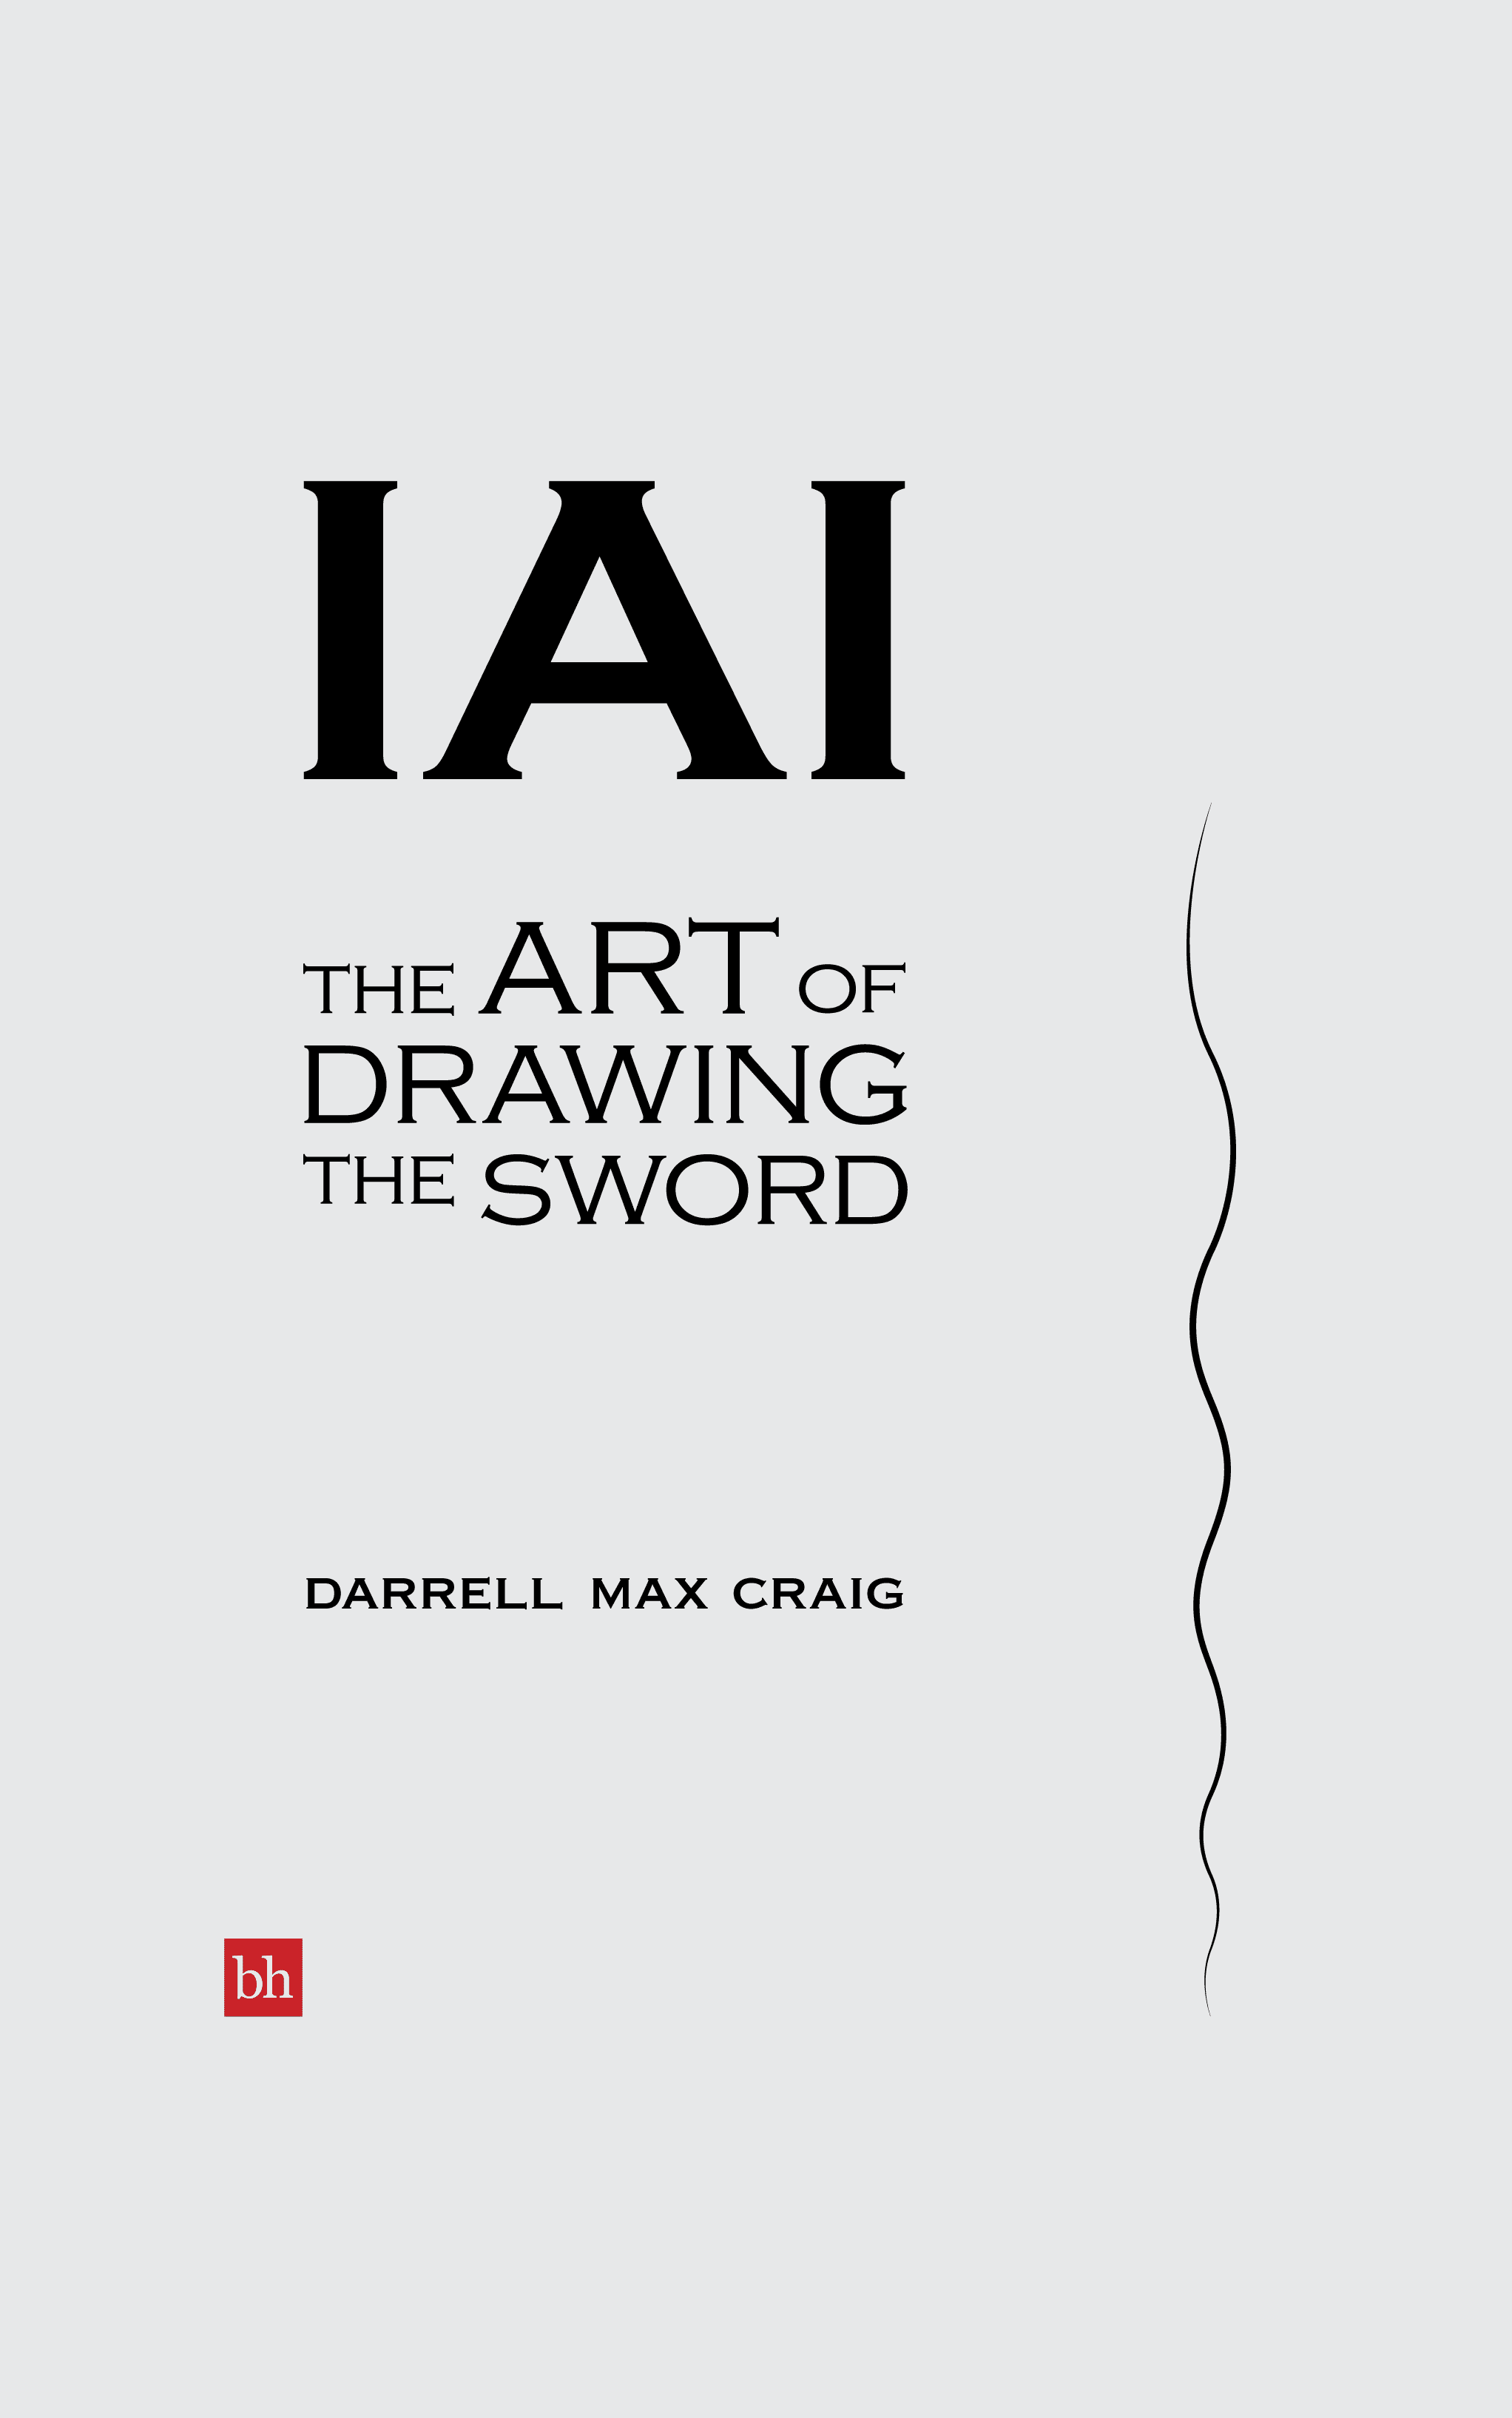 IAI: The Art Of Drawing The Sword by Darrell Max Craig